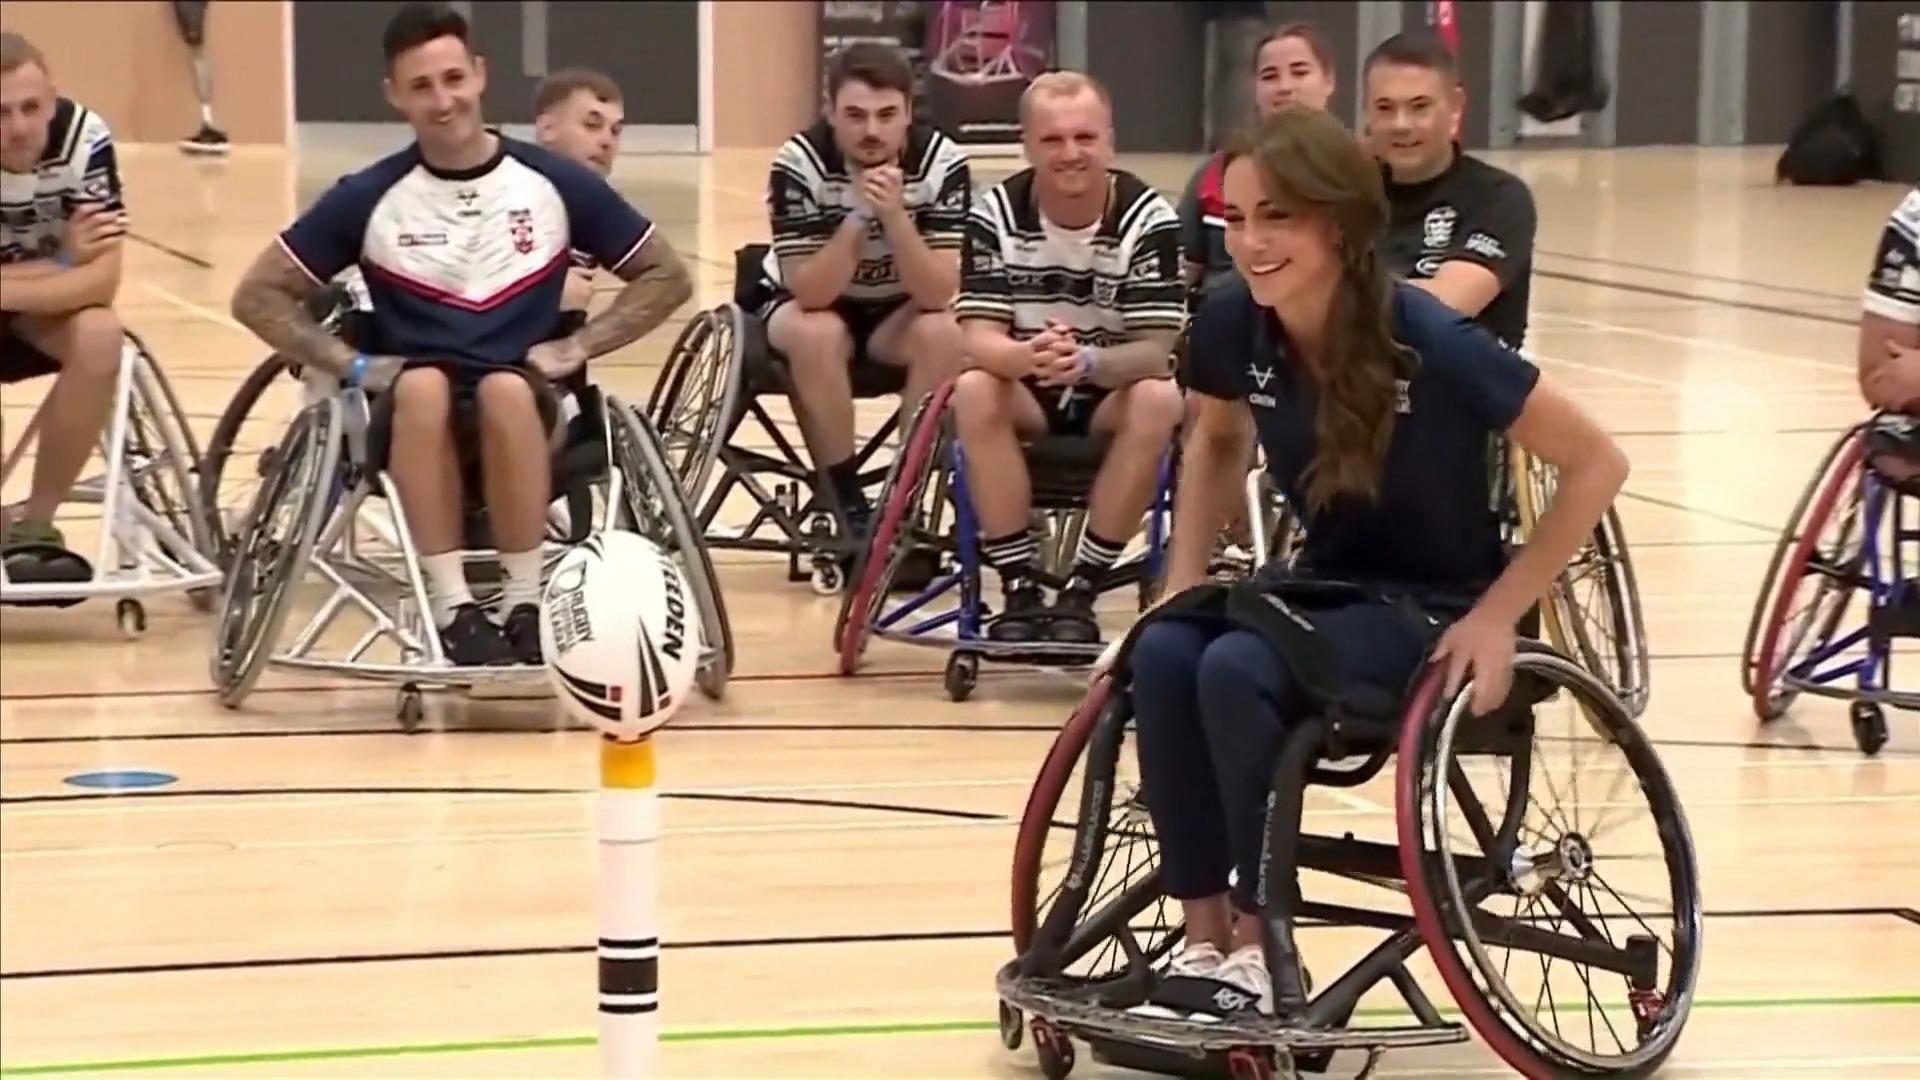 Princess Kate shows full commitment to wheelchair rugby. She enchants everyone